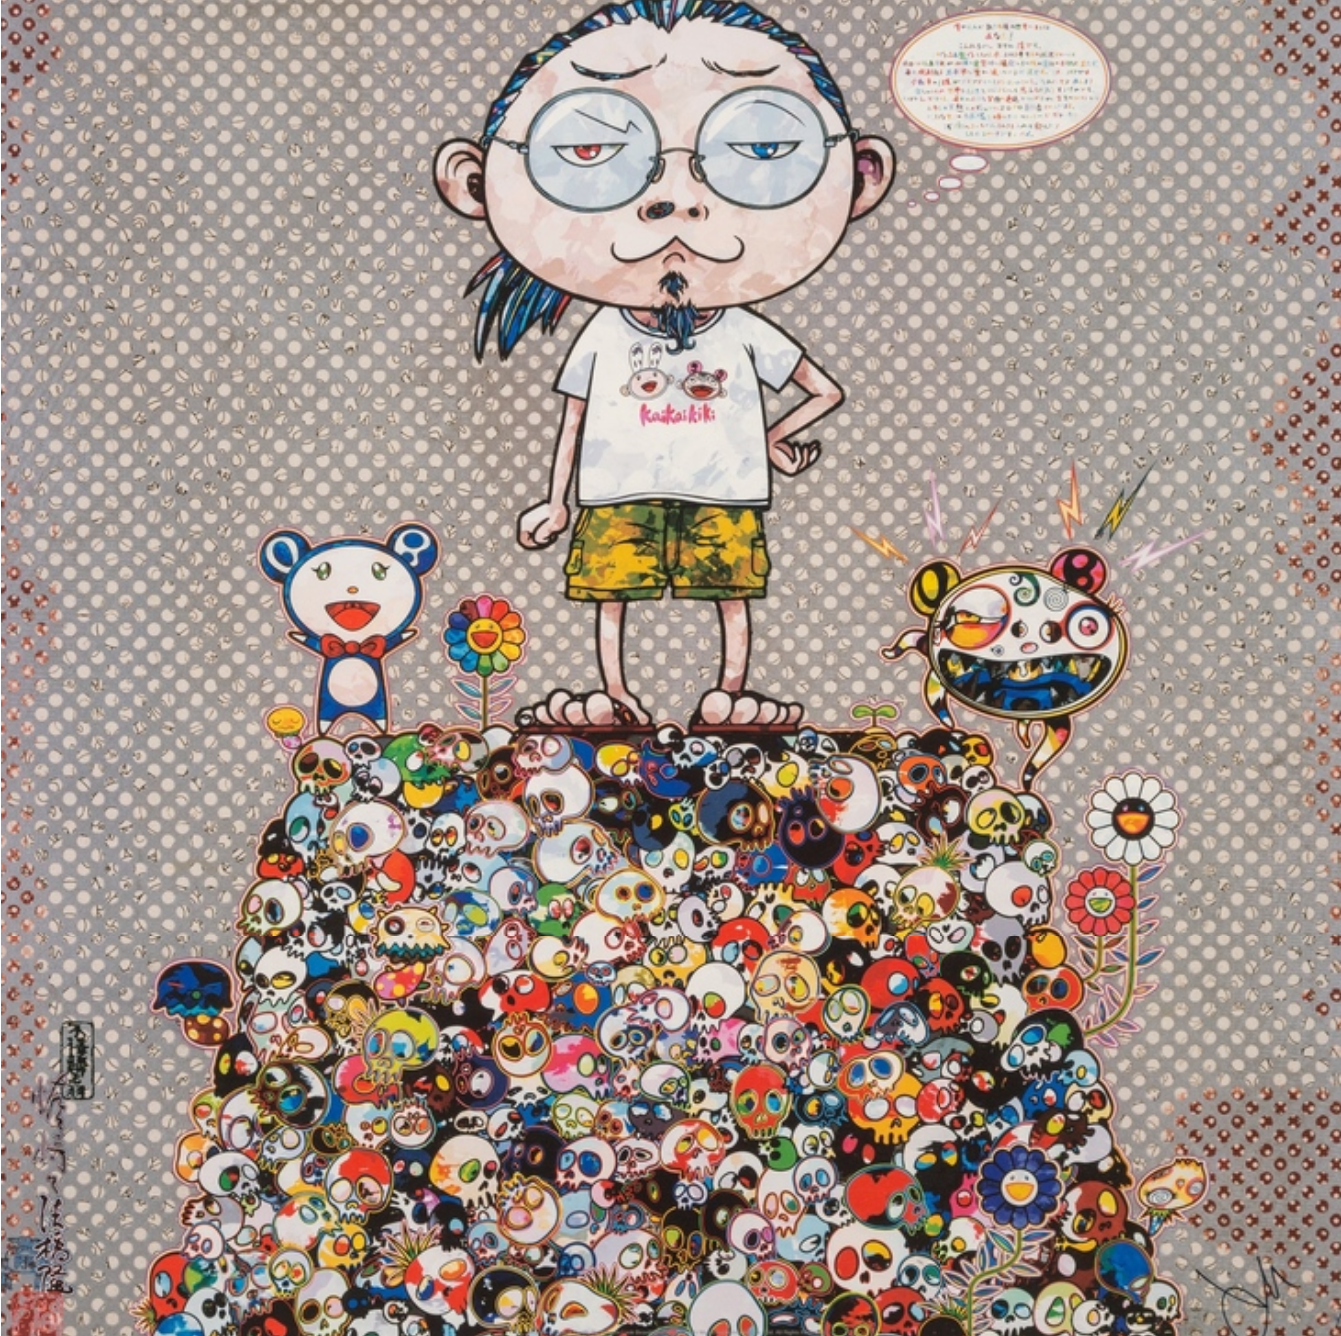 Takashi Murakami - With the Notion of Death, the Flowers Look Beautiful